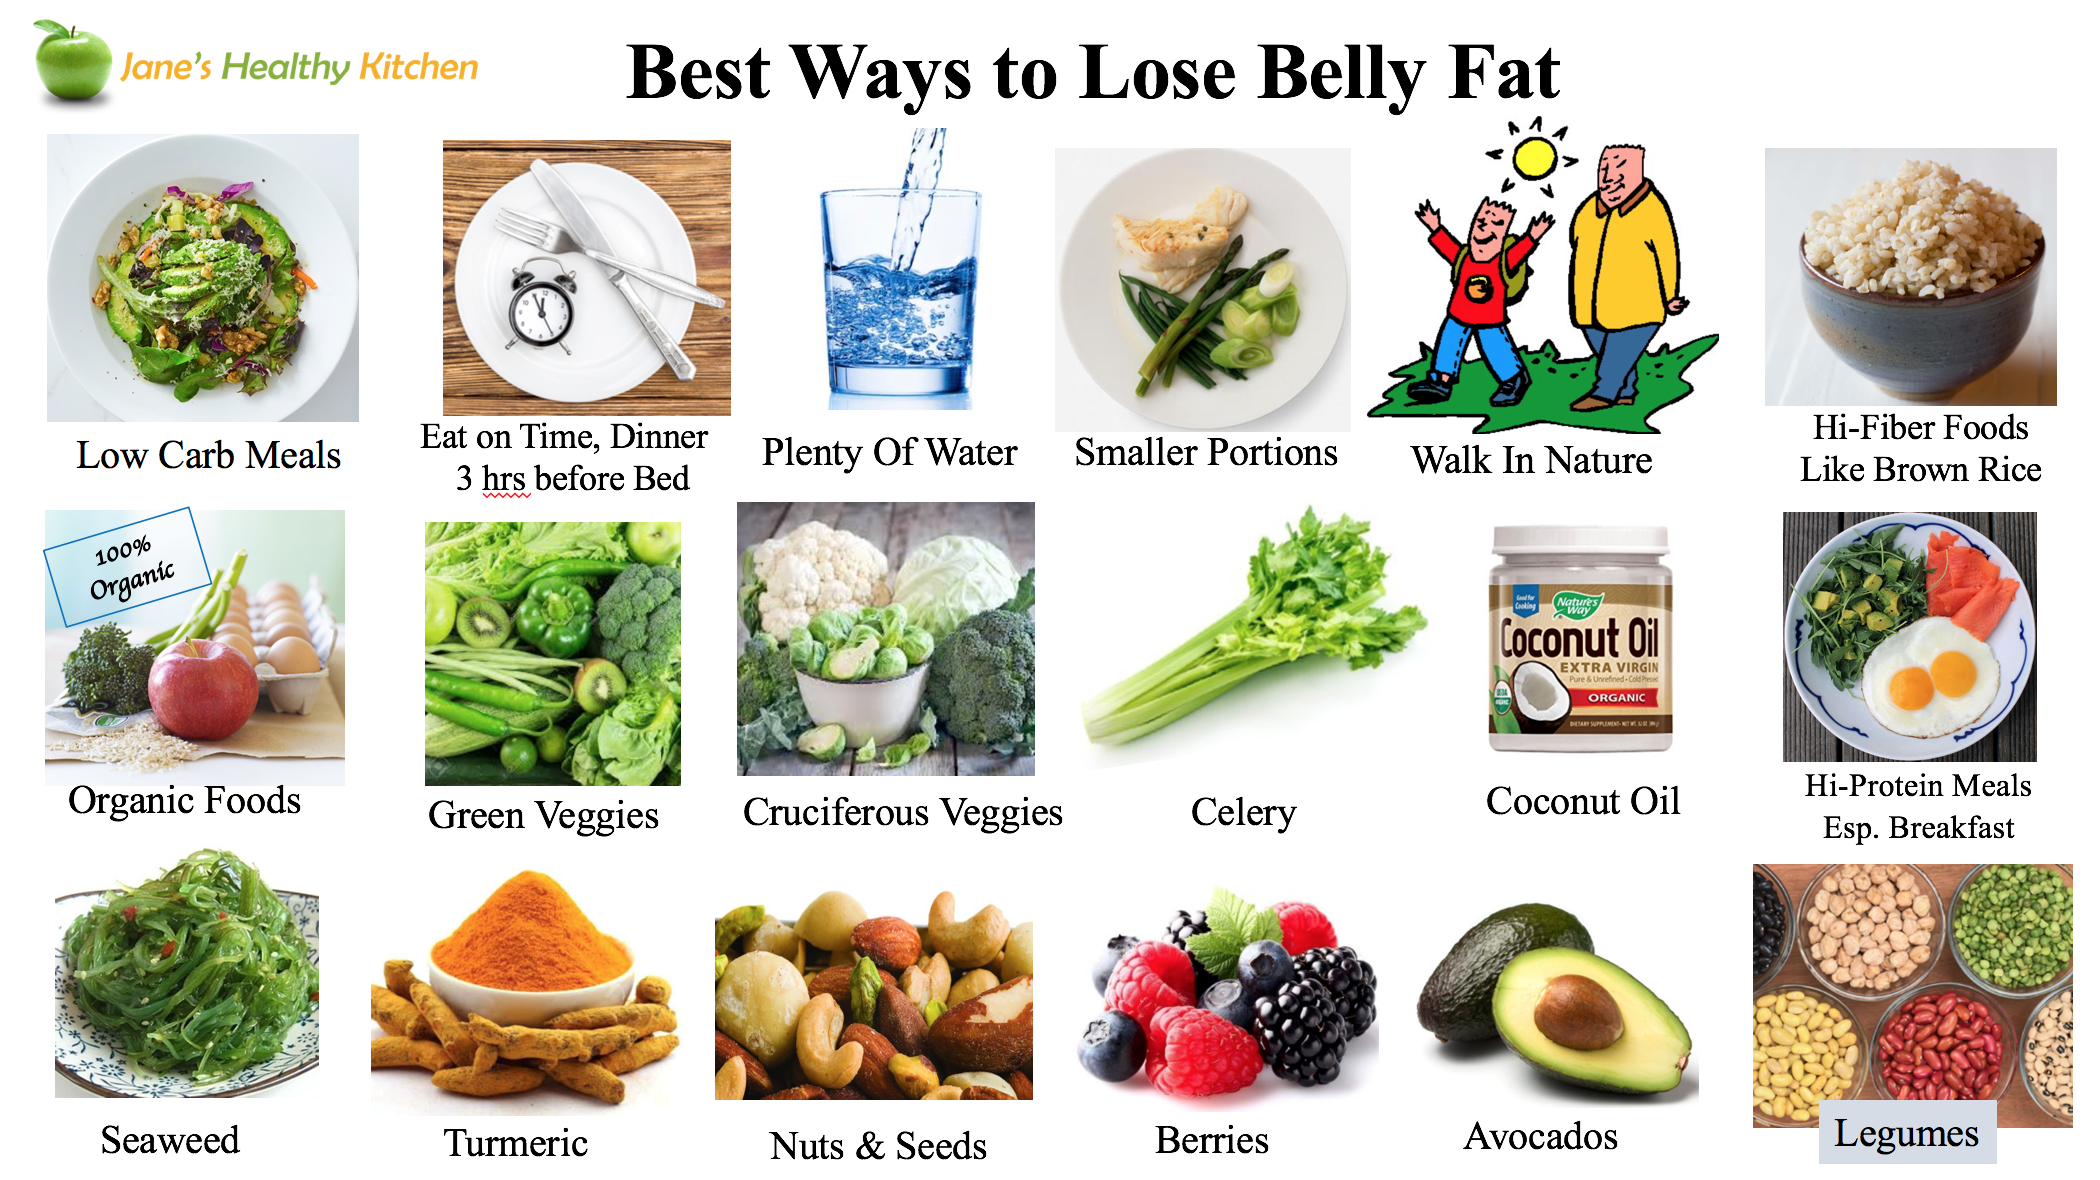 Foods To Eat To Lose Belly Fat Diet